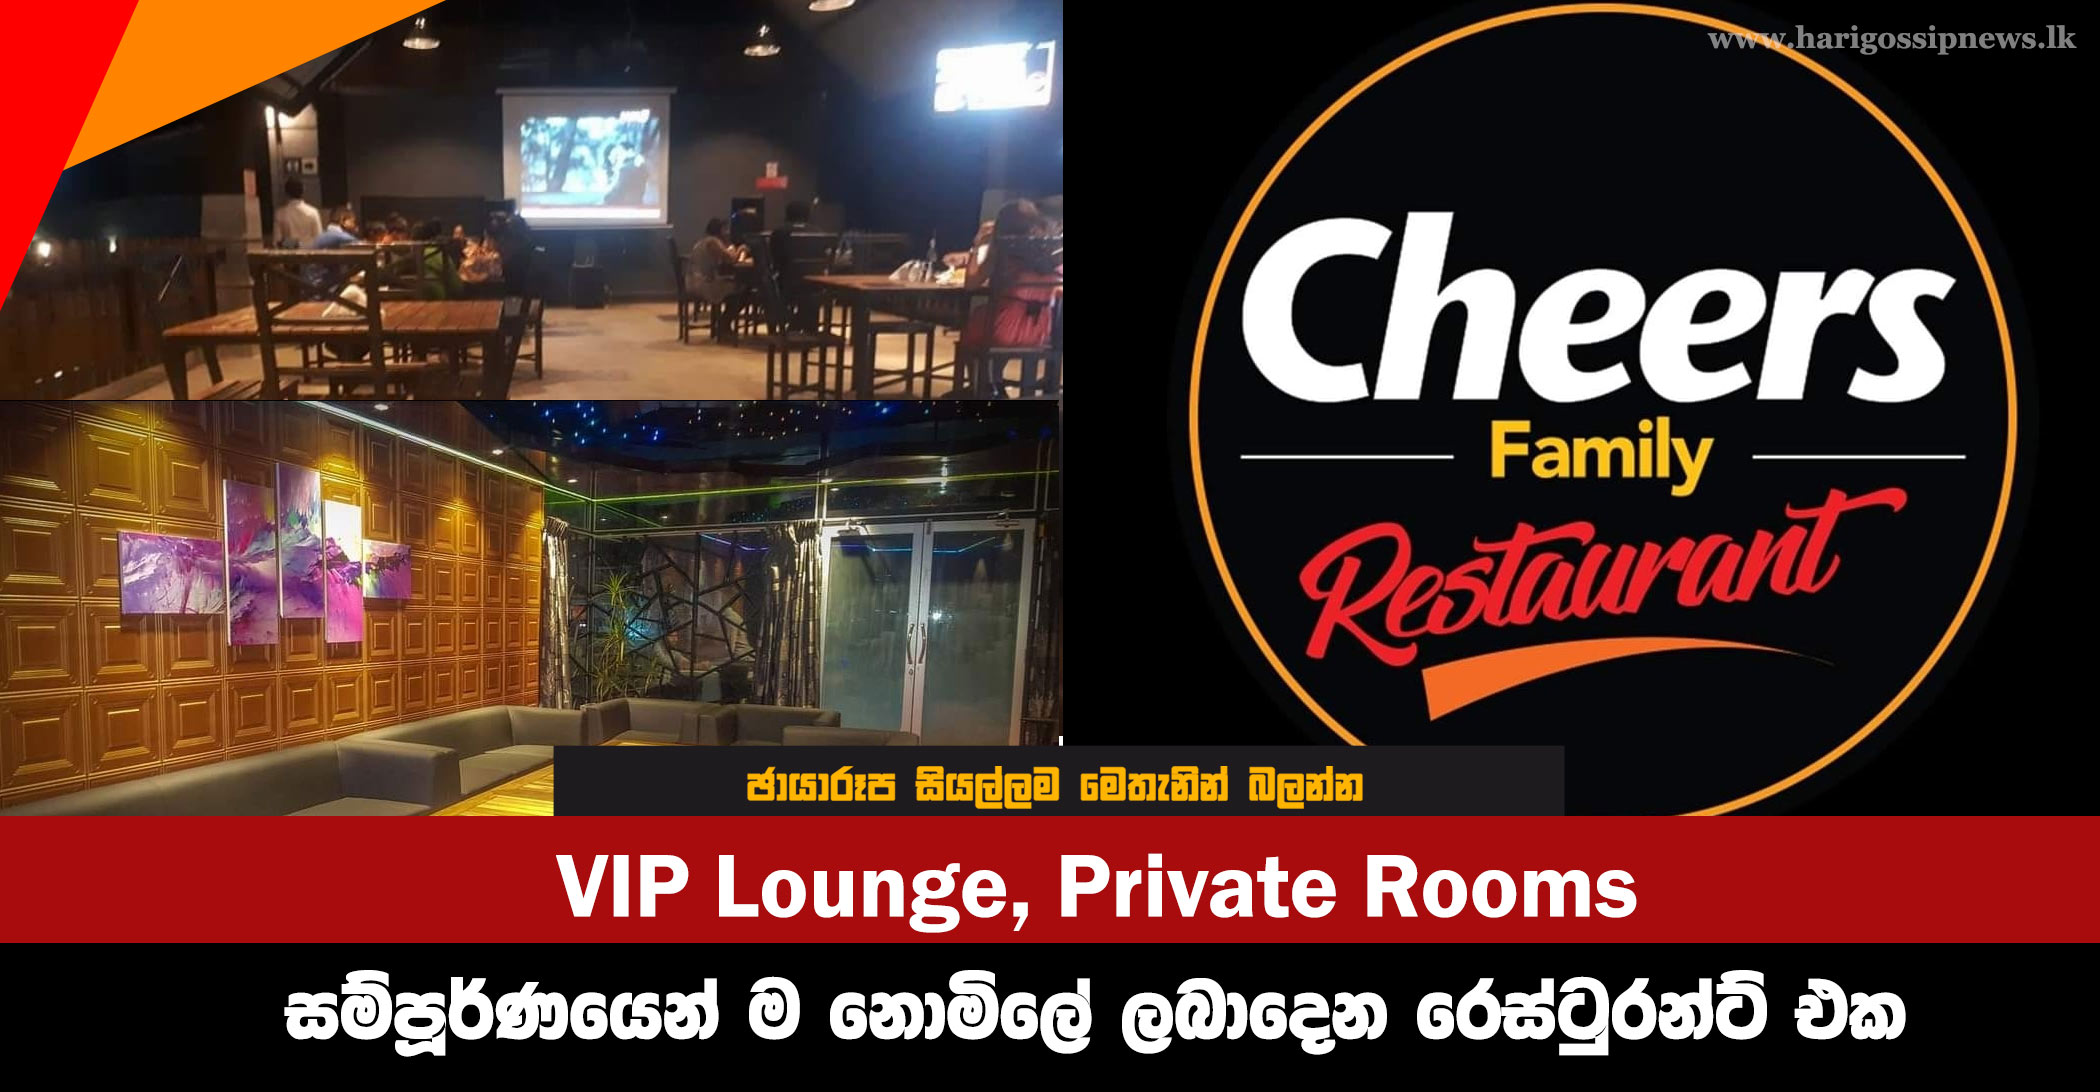 VIP Lounge, Private Rooms Restaurant Completely Free